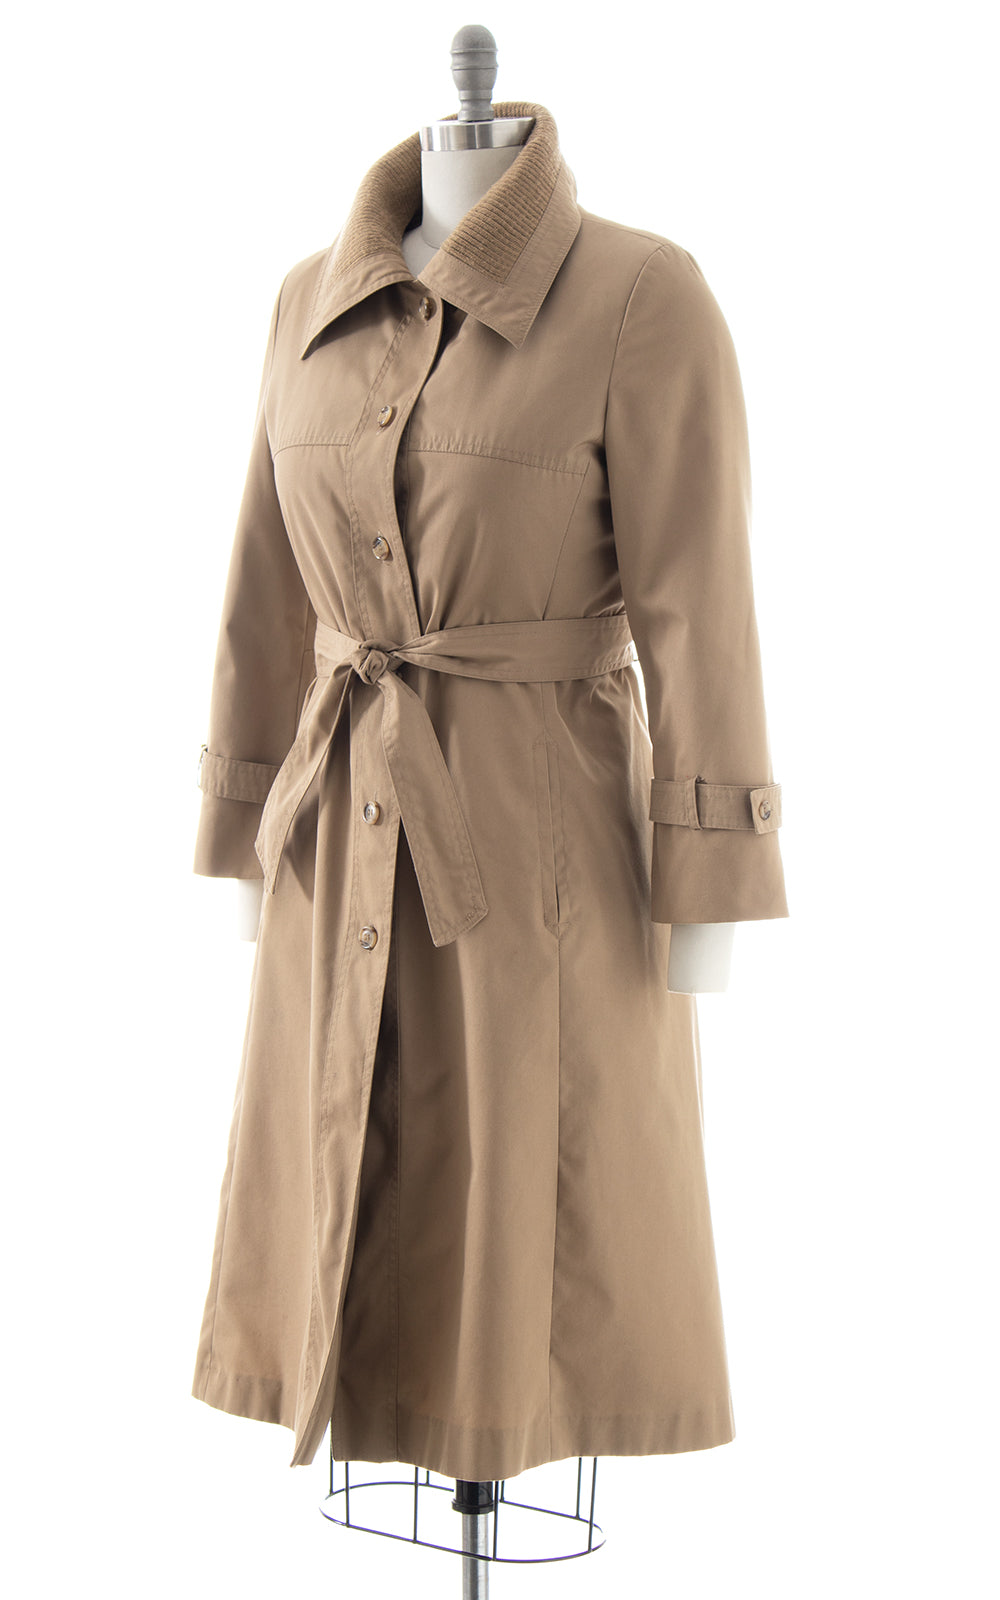 1980s Trench Coat with Removable Shearling Lining | small